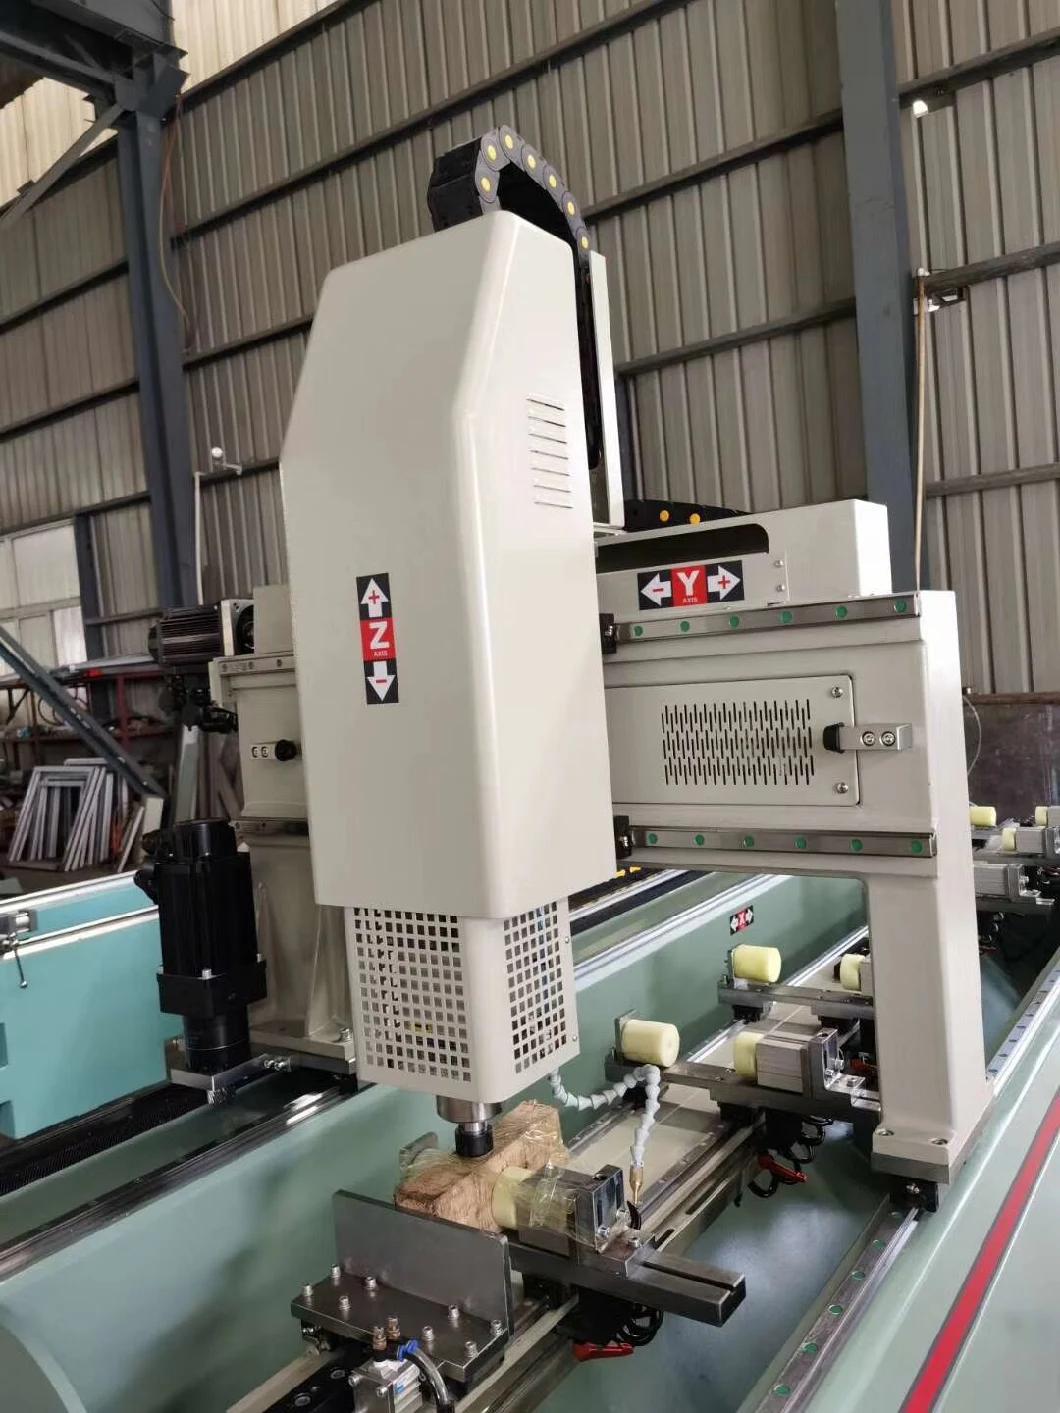 CNC Drilling and Milling Machine for Curtain Wall Aluminum Alloy Profiles Window Door